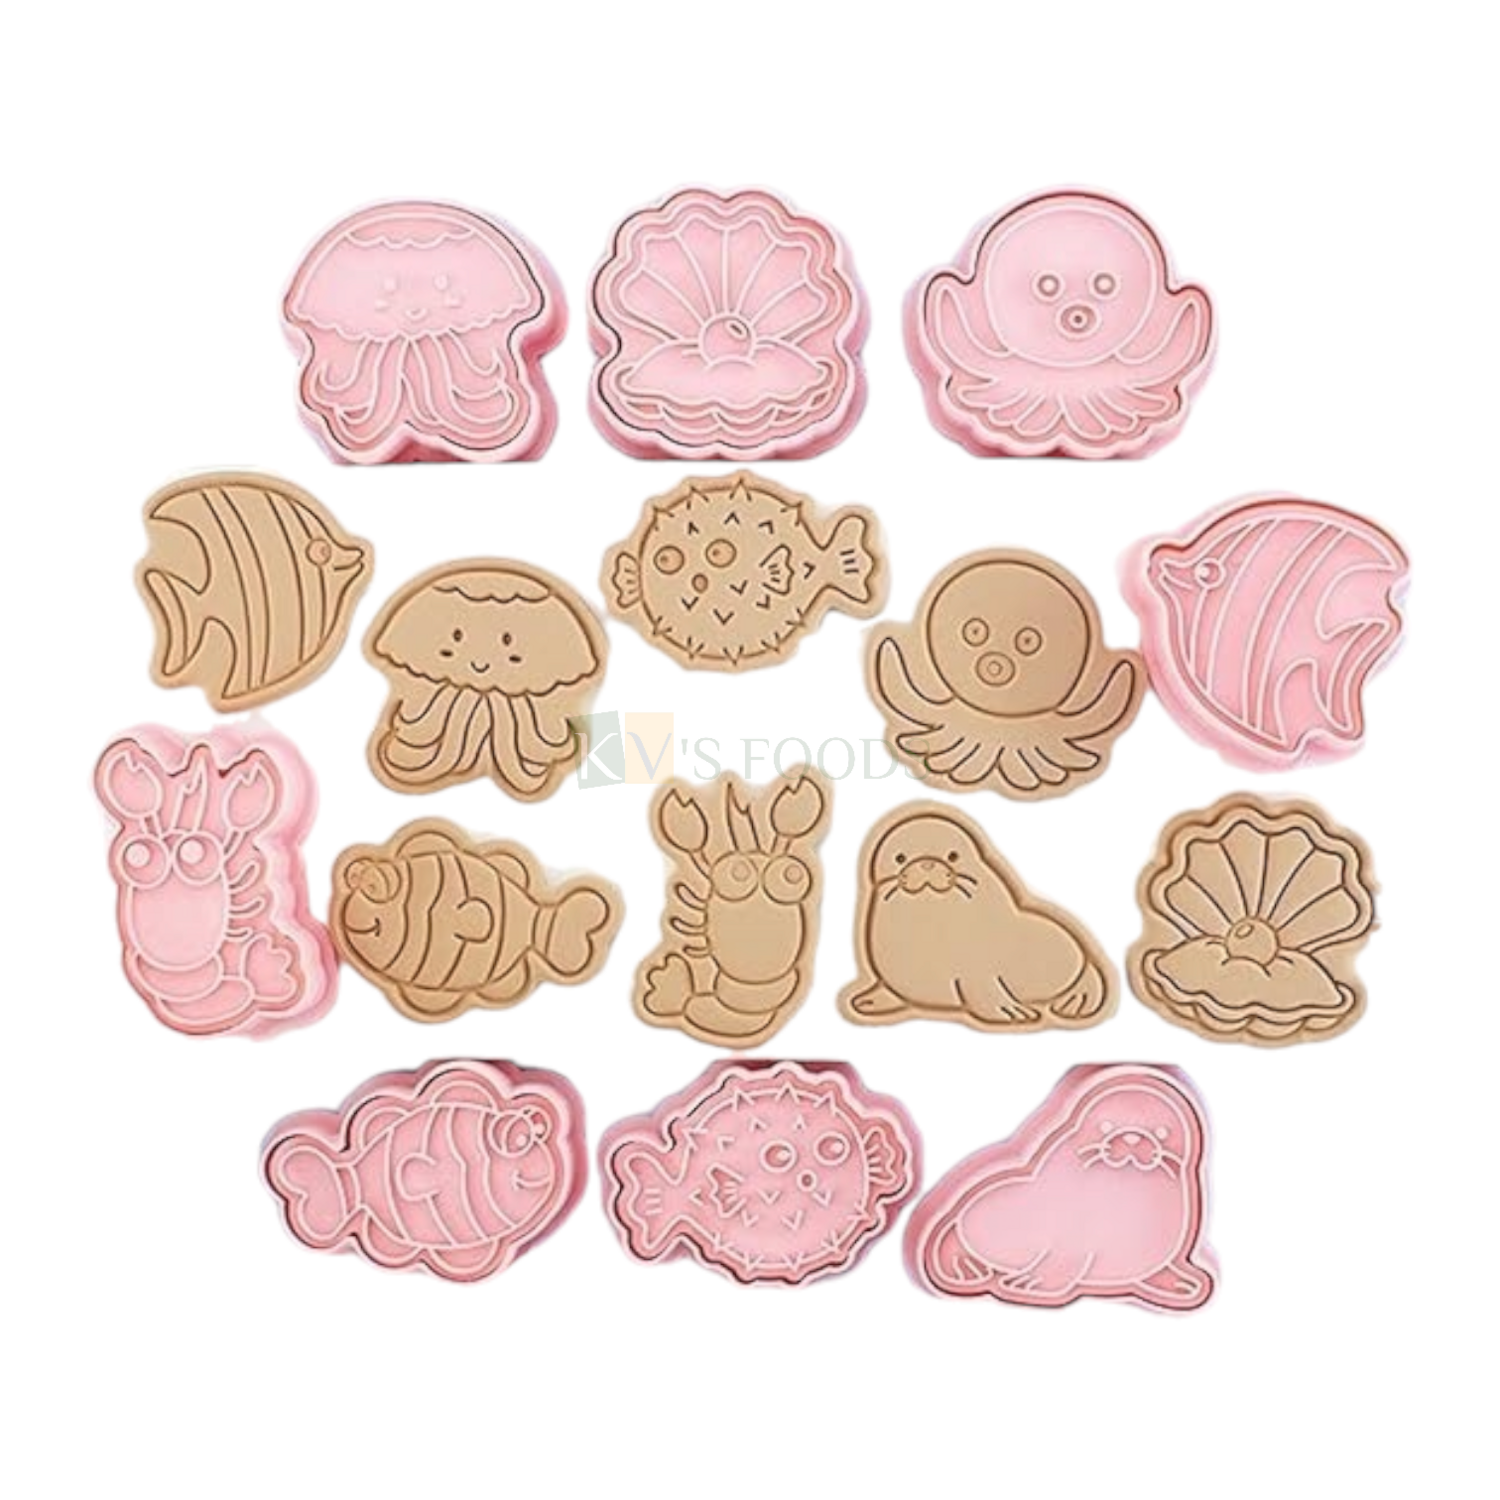 8 PCS Pink Sealife Creatures Cutters Fondant Plunger Jelly Fish Crab, Fish, Walrus Oysters Octopus Underwater Theme Aquatic Creatures Marine Ocean Animals SEA Critters Theme Embossing Presses Moulds